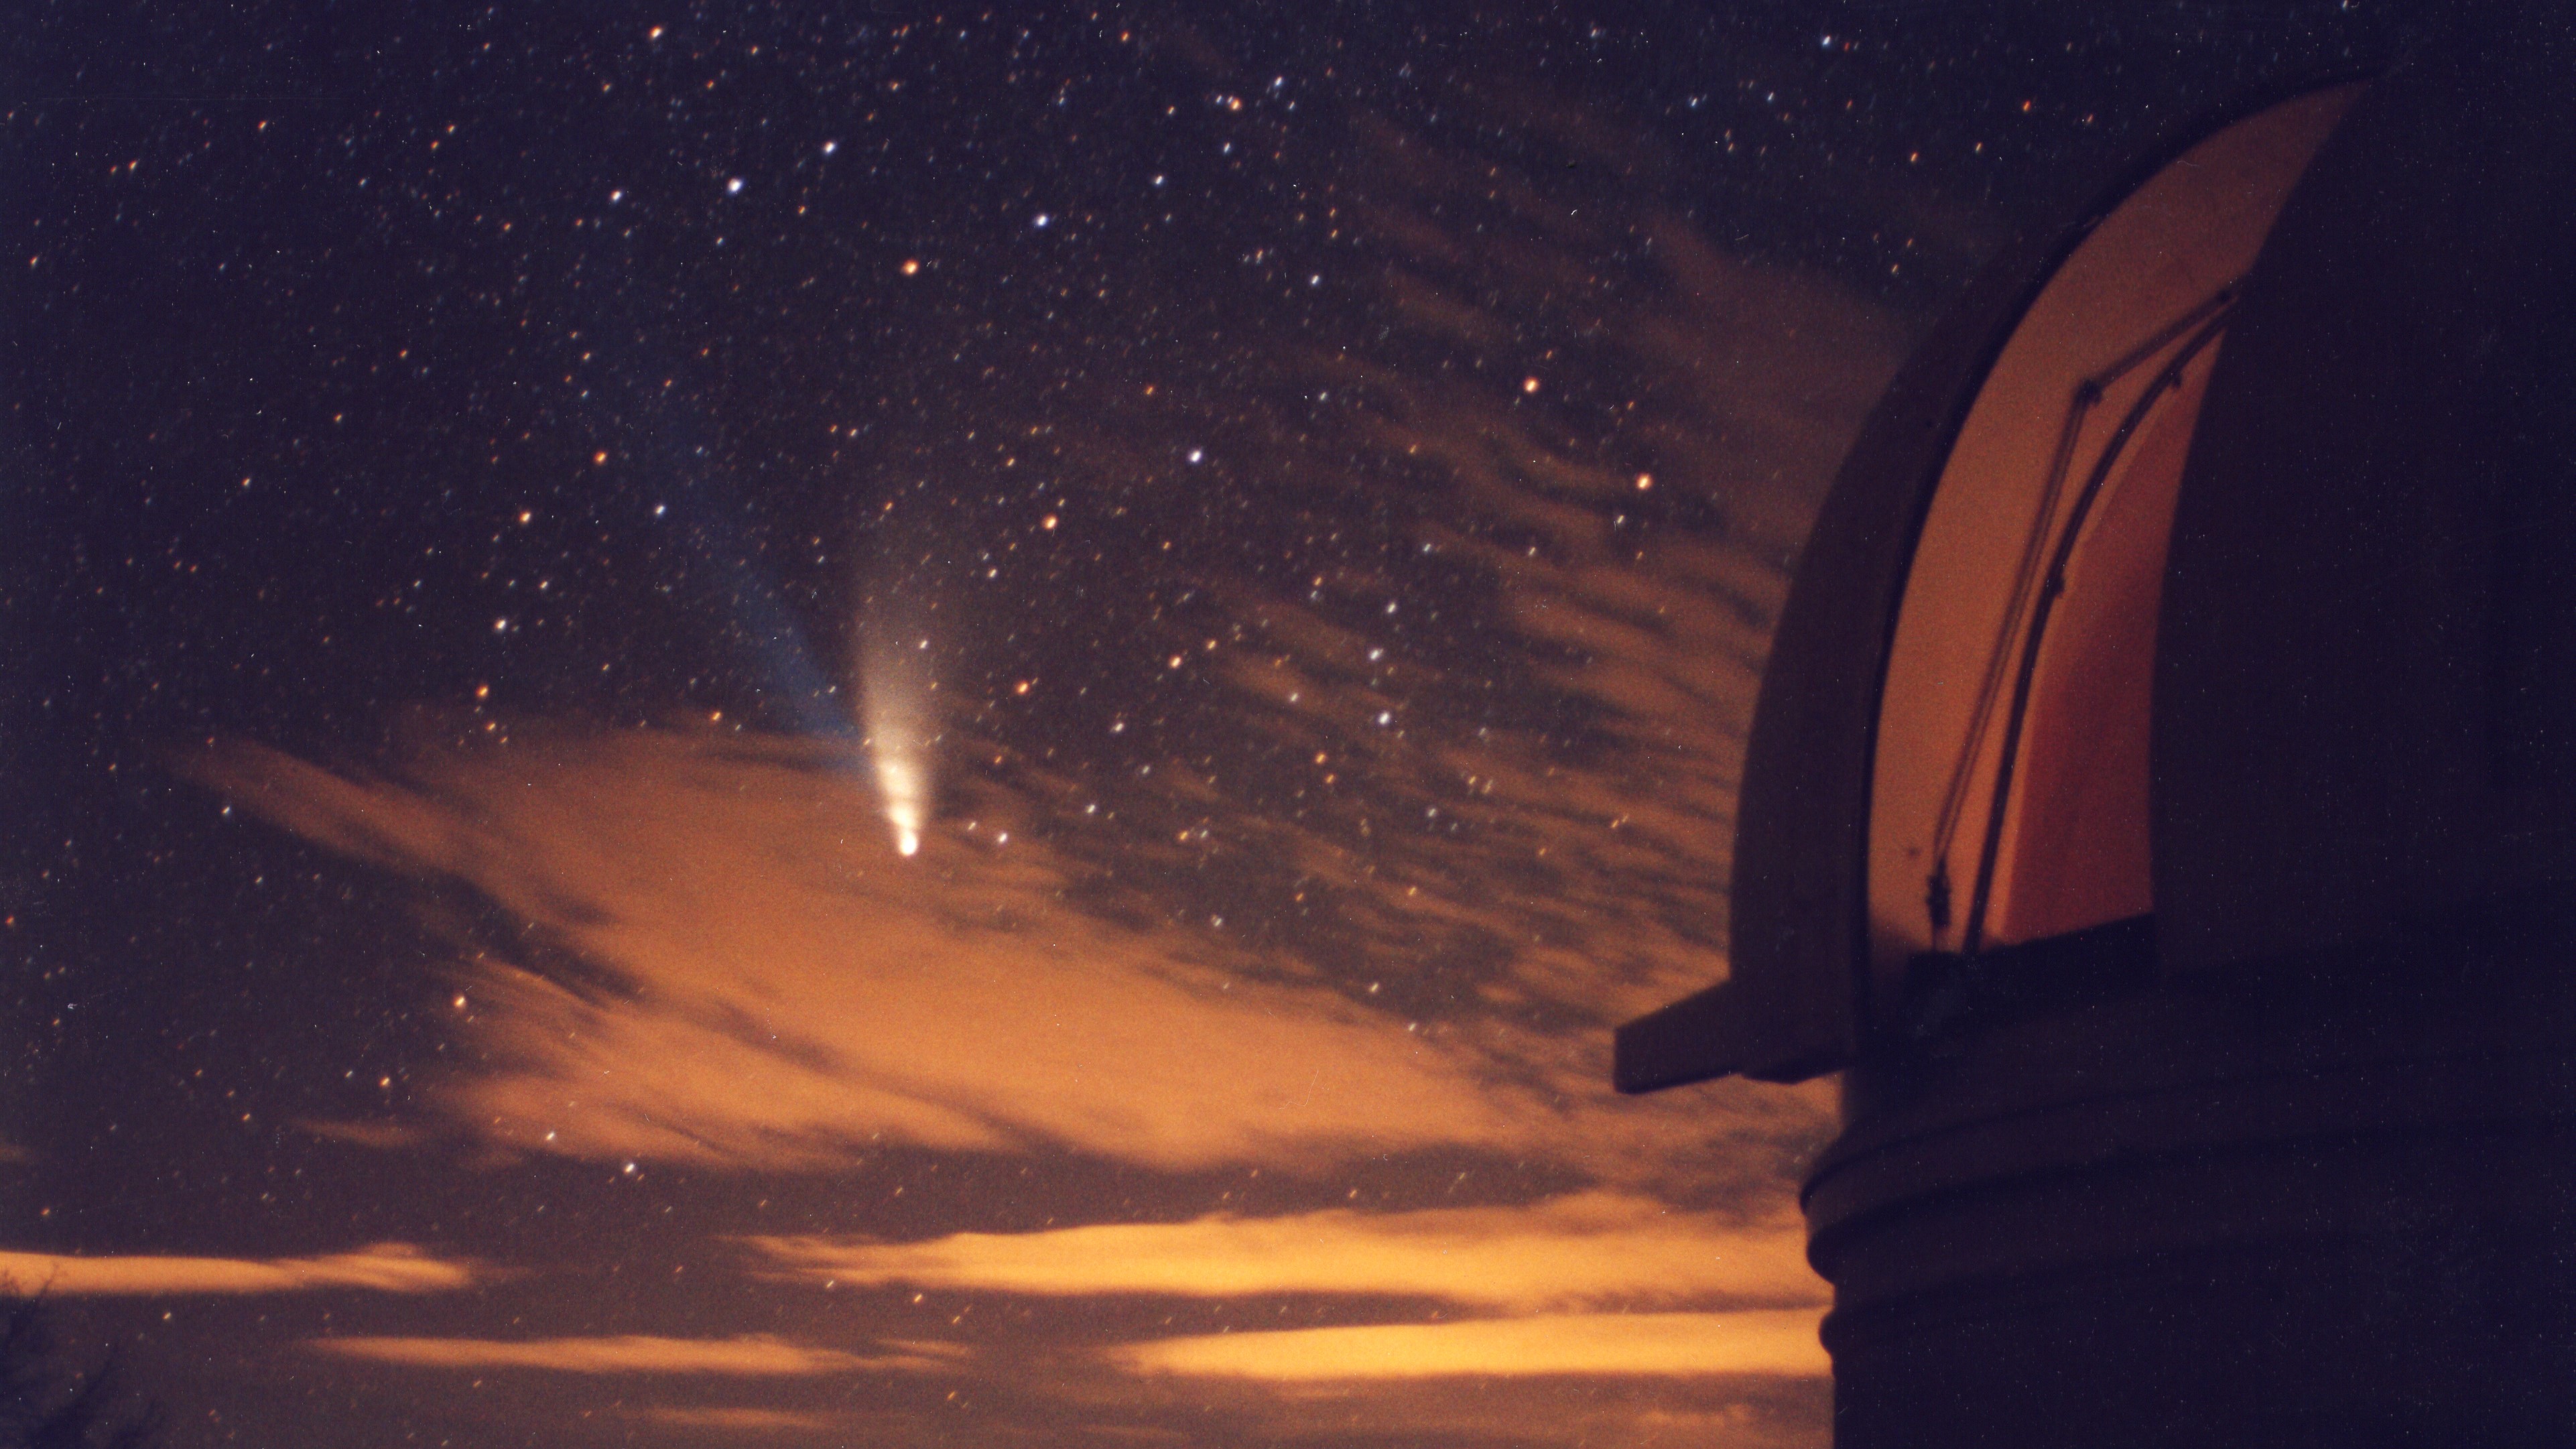 The Hale-Bopp comet will not return to the inner solar system for thousands of years.